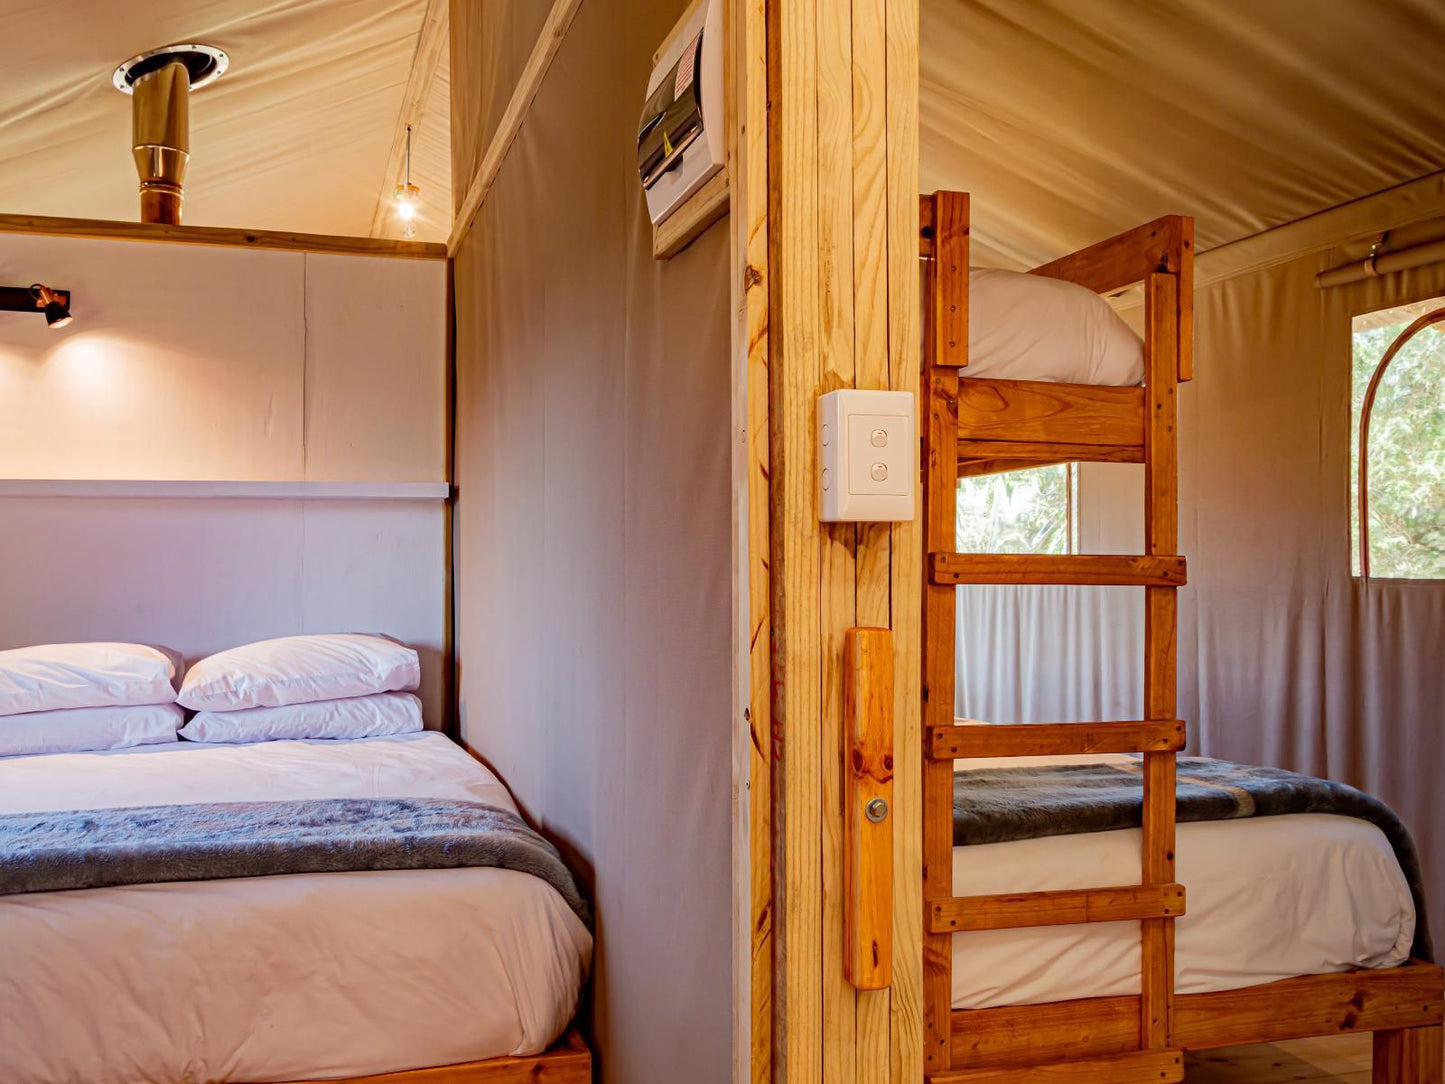 Africamps At Mackers Hazyview Mpumalanga South Africa Tent, Architecture, Bedroom